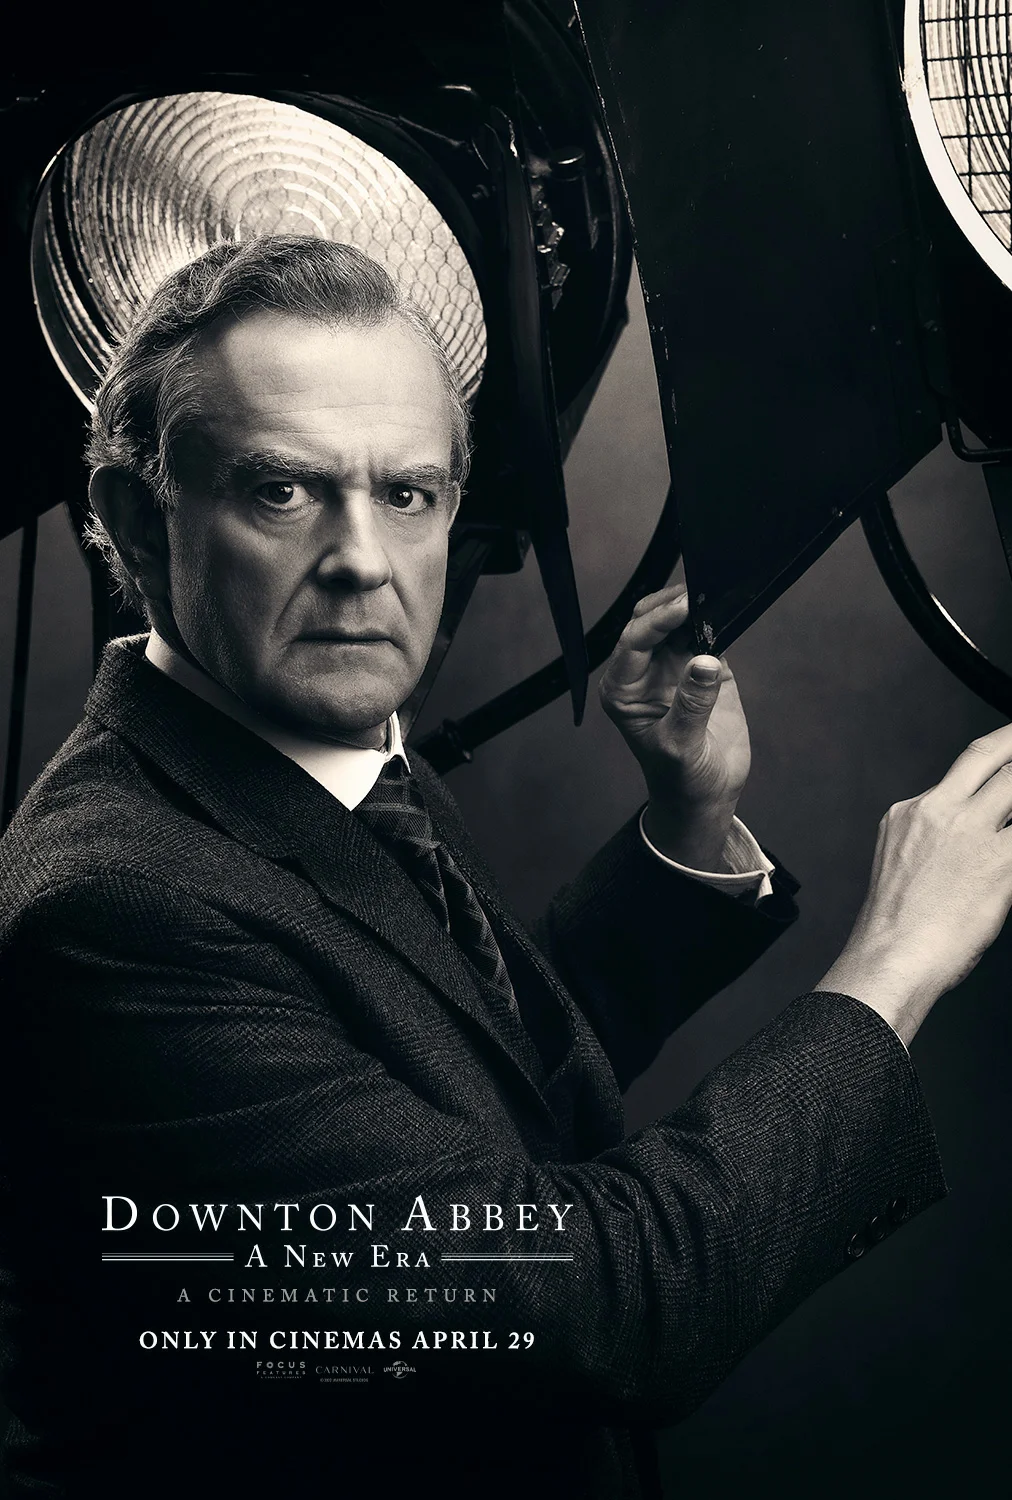 downton-abbey-a-new-era-released-character-posters-multiple-main-actors-appear-2